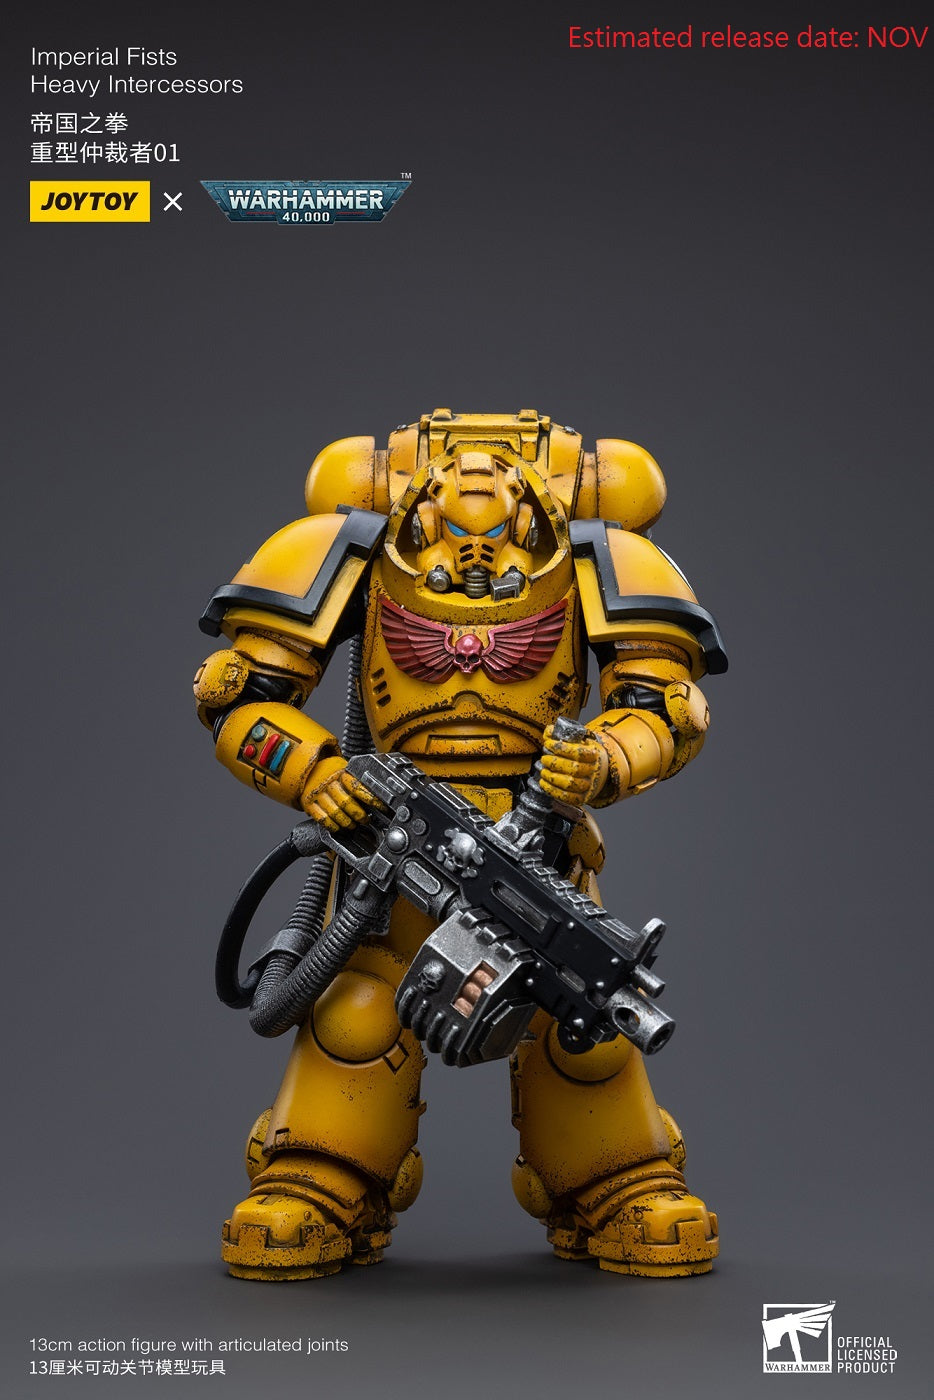 Imperial Fists Heavy Intercessors 01 - Warhammer 40K Action Figure By JOYTOY